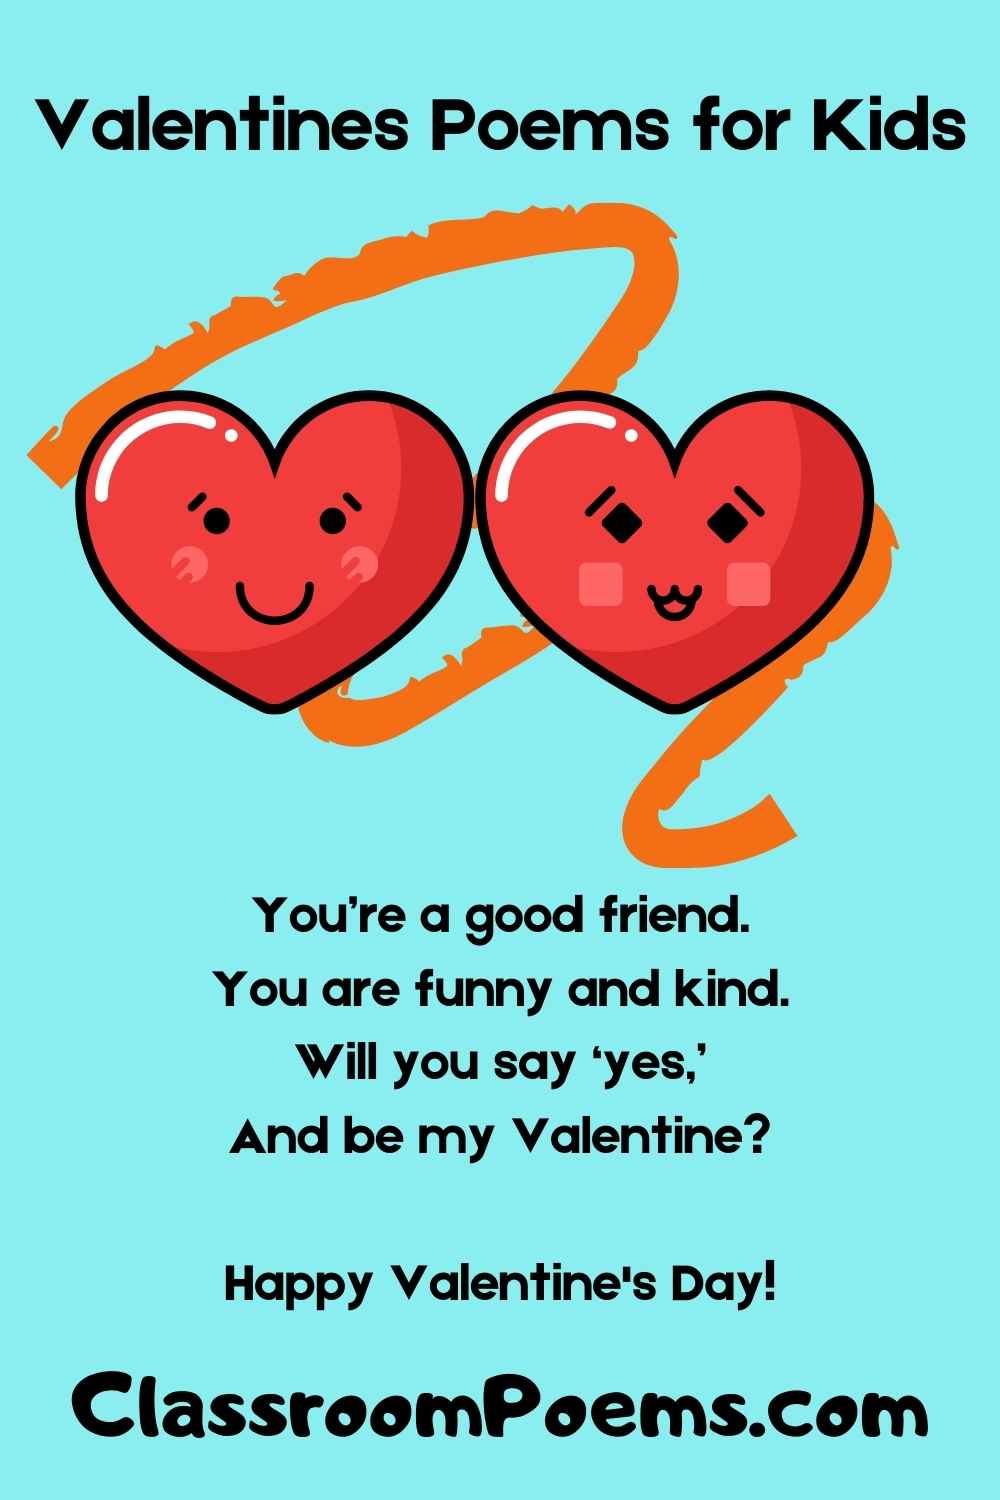 These Valentine poems for kids are perfect for passing to friends in the classroom.